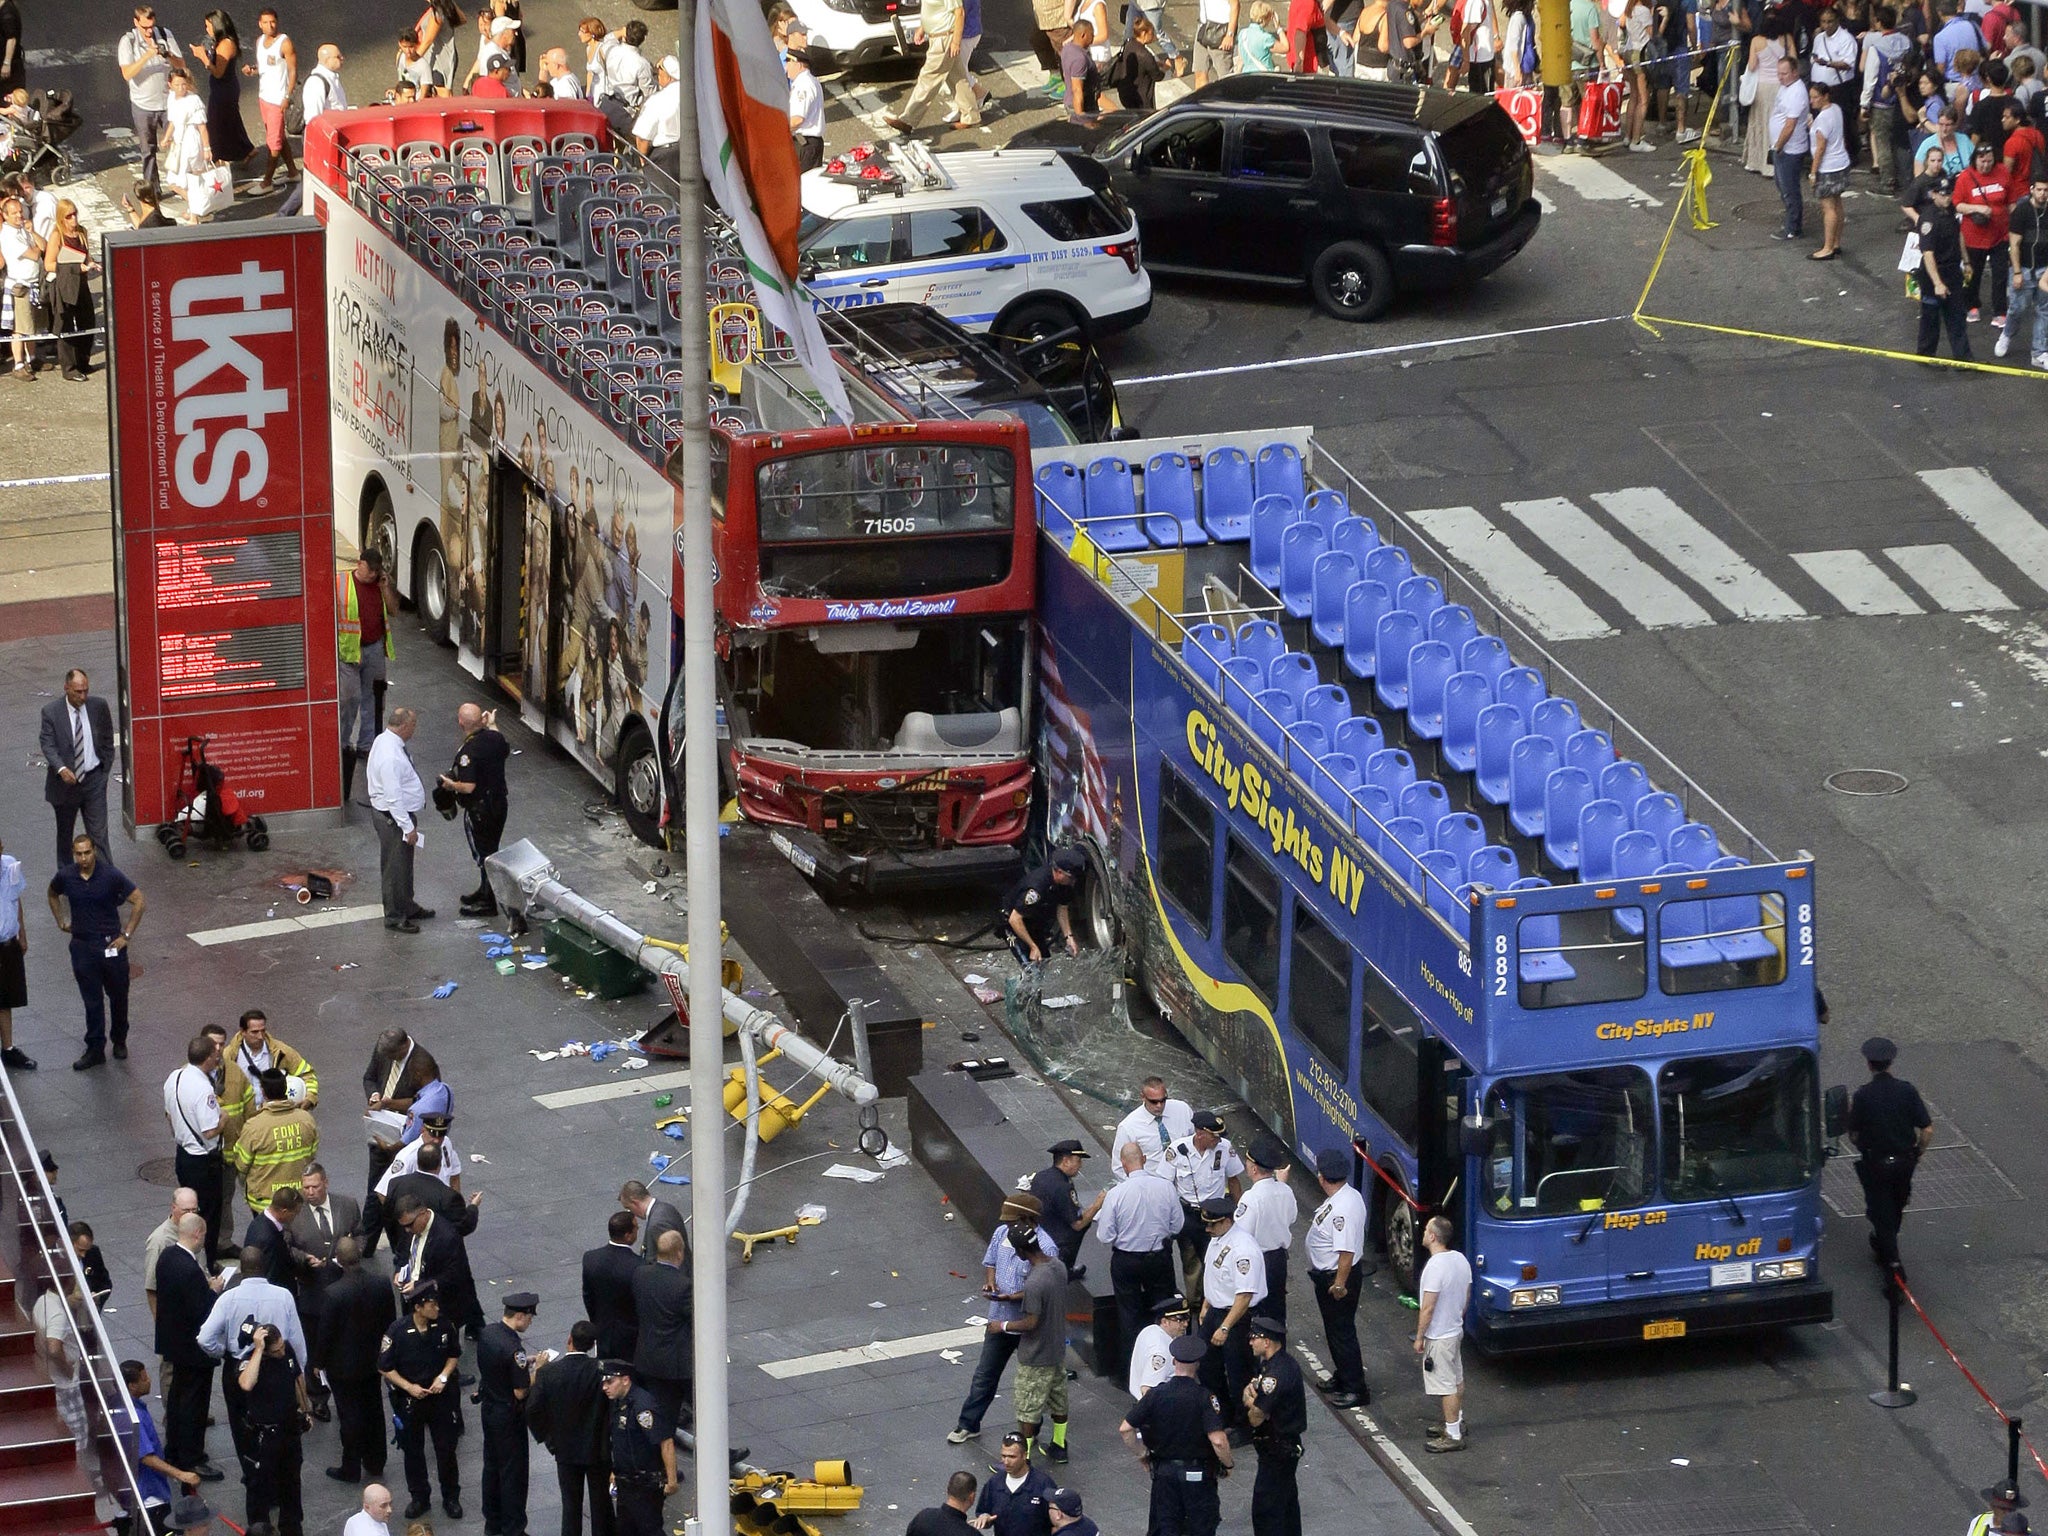 Two double-decker tour buses sit at the corner of 47th Street and 7th Avenue in Times Square after colliding, Tuesday, Aug. 5, 2014, in New York